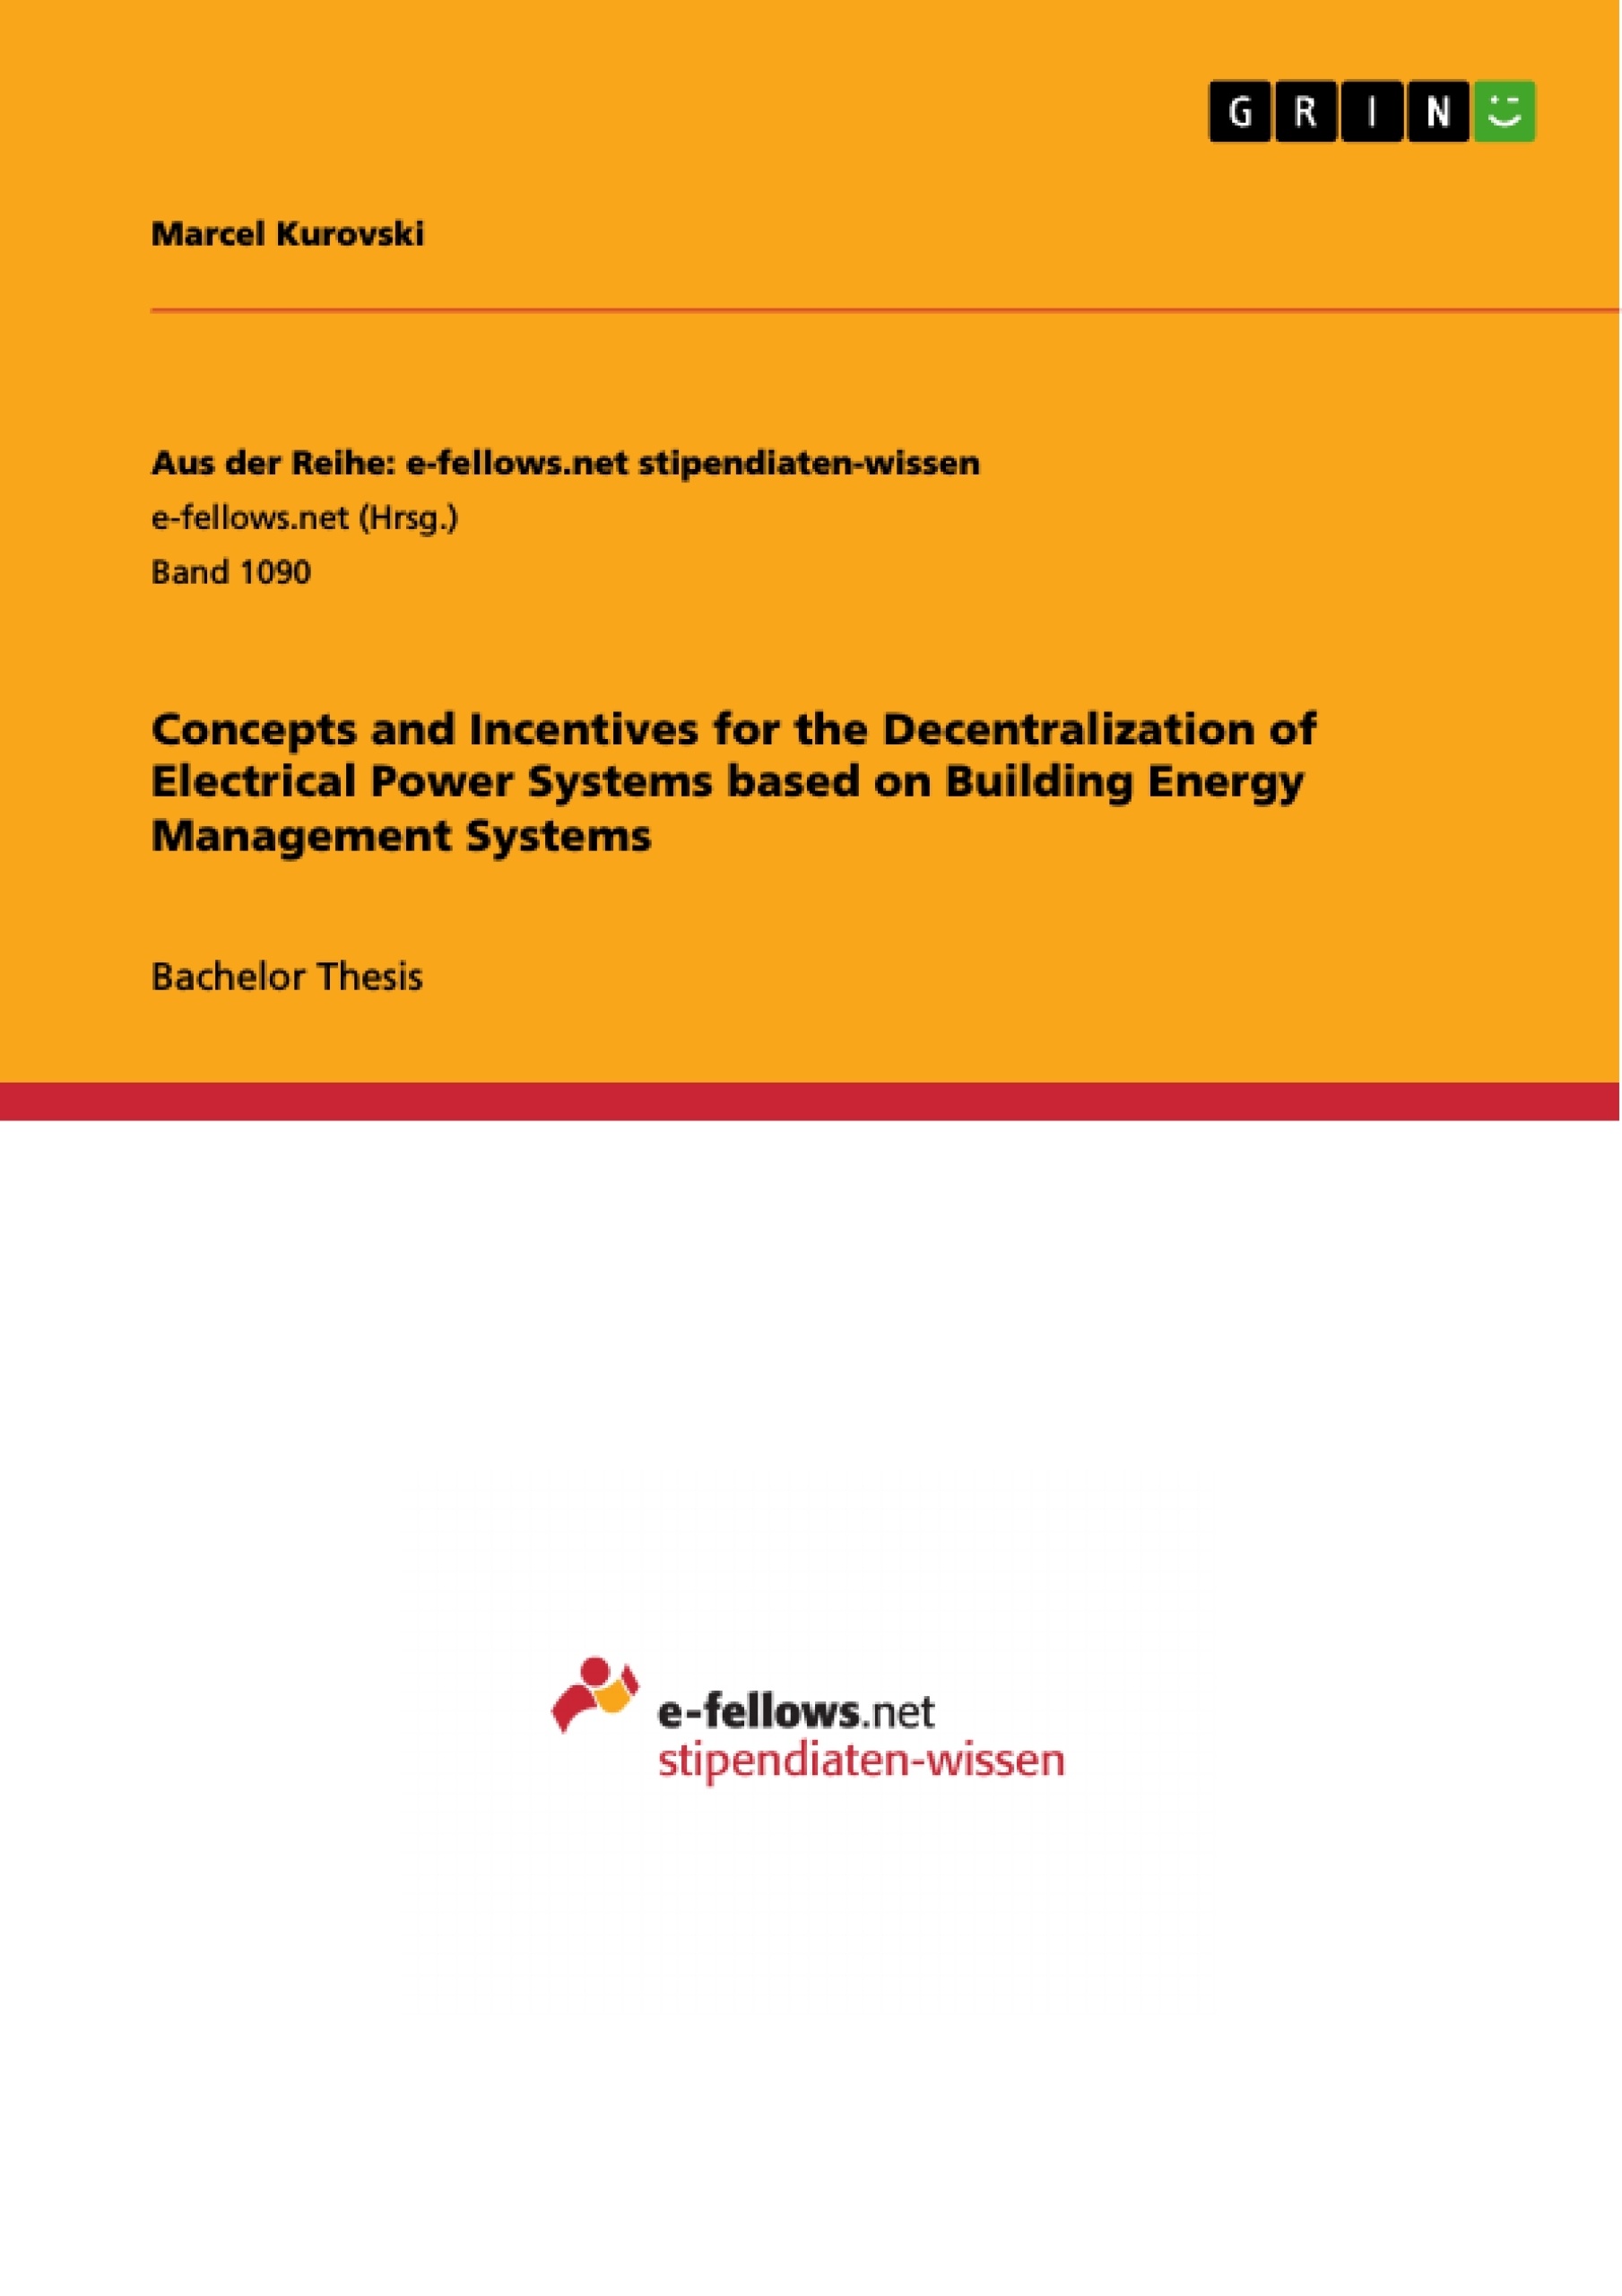 Título: Concepts and Incentives for the Decentralization of Electrical Power Systems based on Building Energy Management Systems